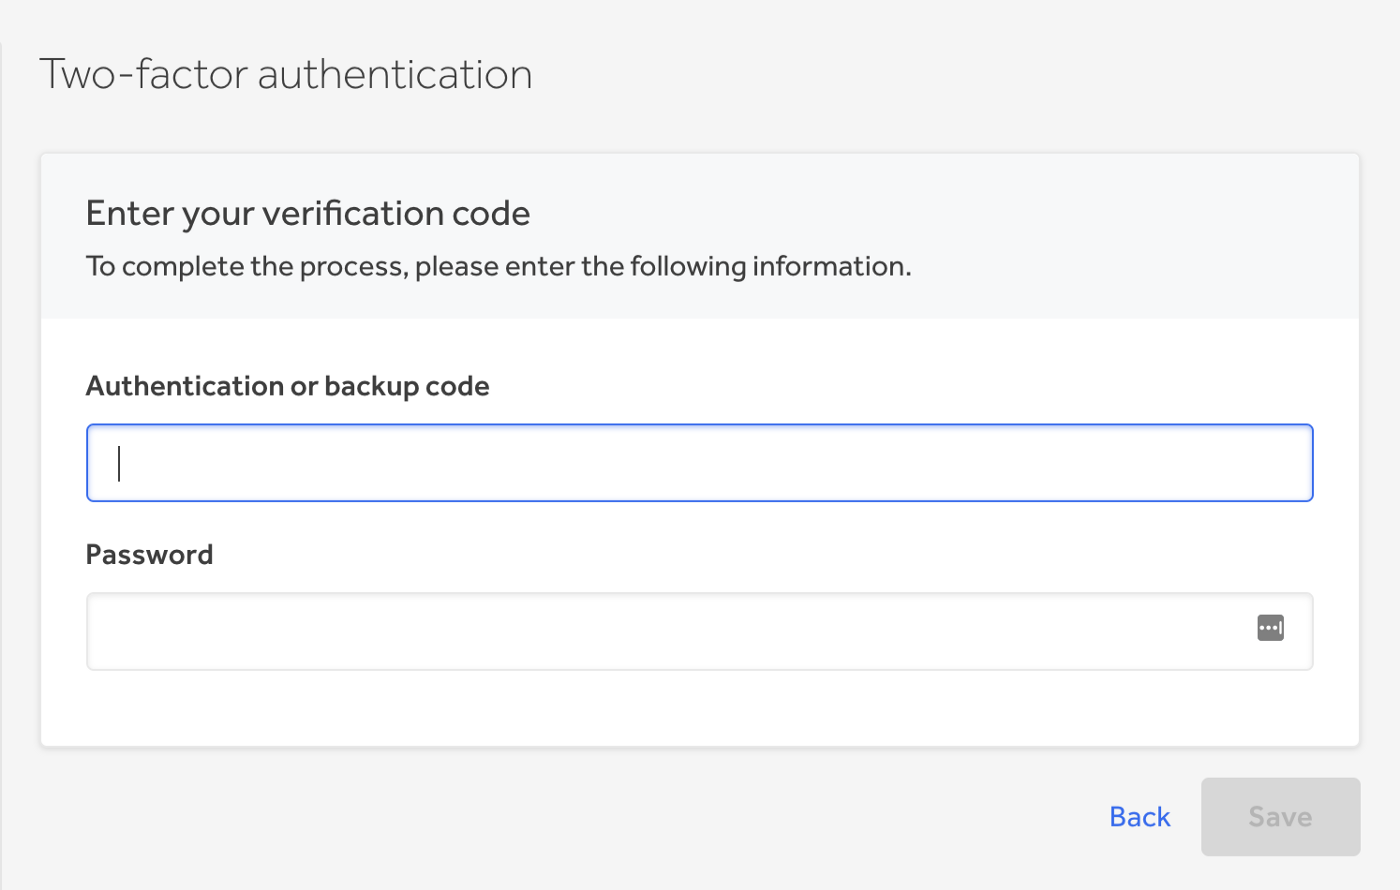 2FA code along with the current password is required on HackerOne MFA page